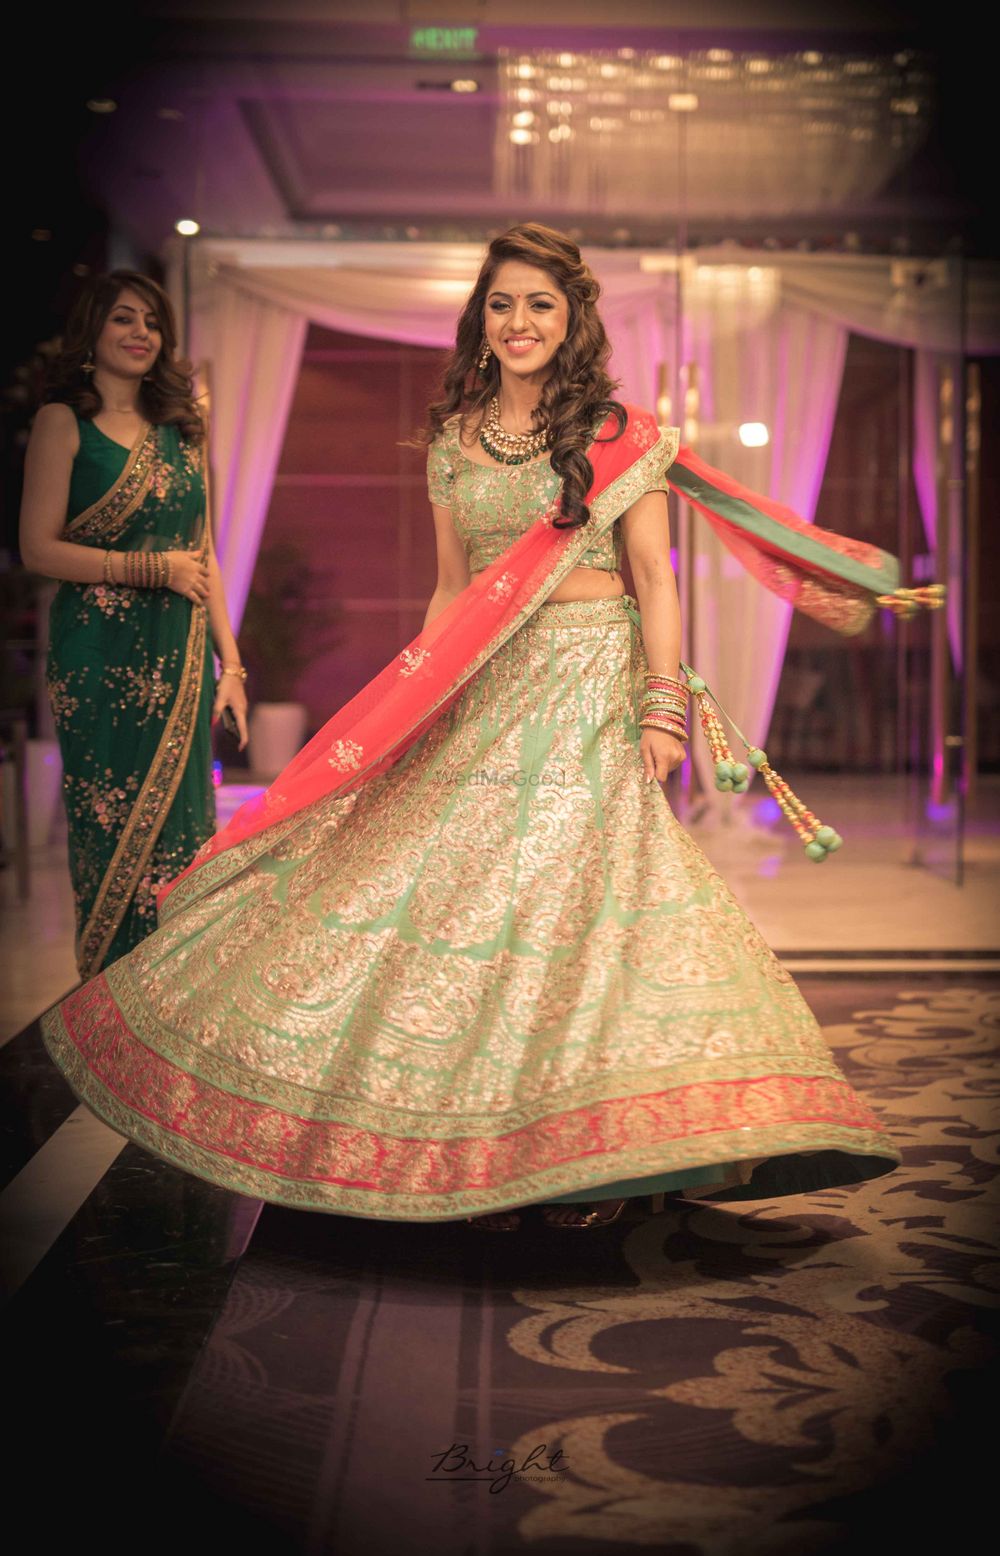 Photo of Bride twirling in red and turquoise lehenga